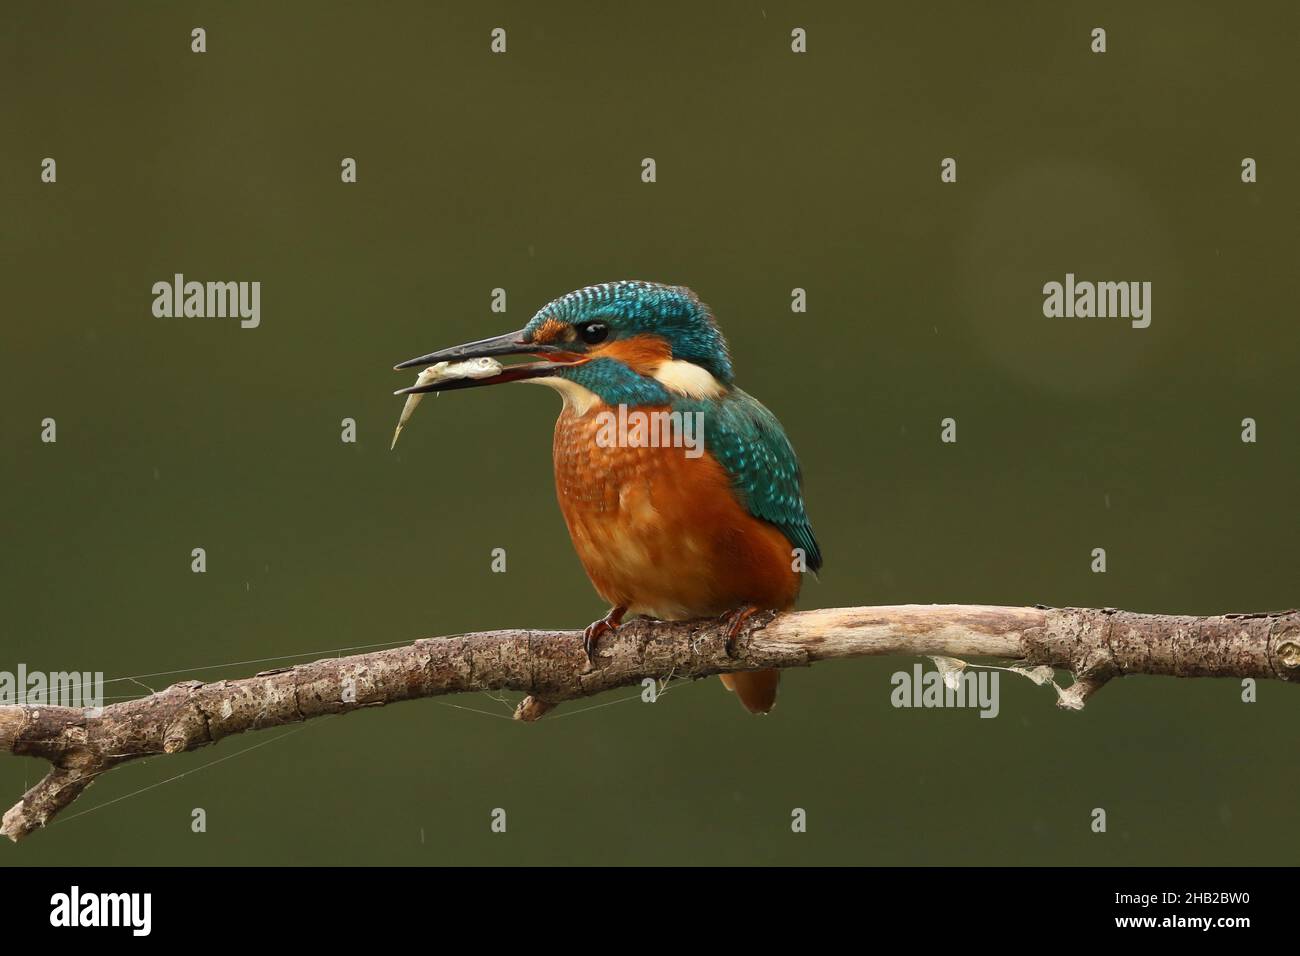 Kingfishers require a good supply of fish and other aquatic prey to survive, diving from branches, they return to stun the prey before consuming. Stock Photo